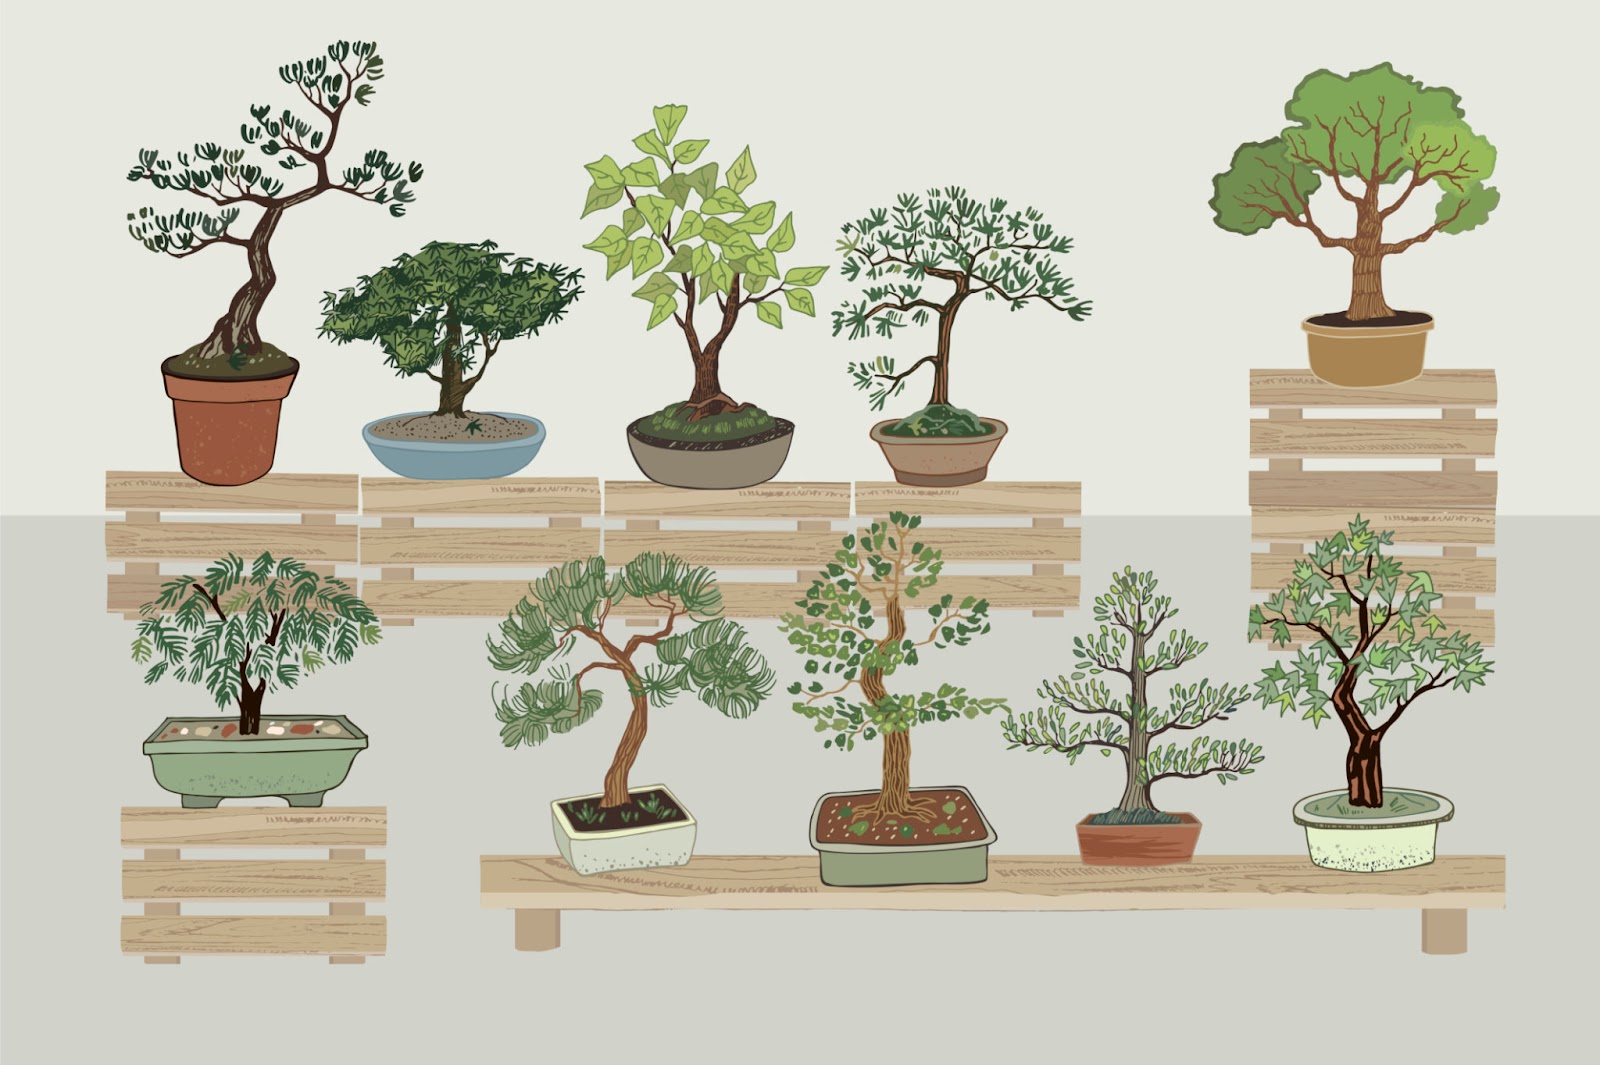 How to Grow a Bonsai Tree at Home: A Detailed Guide for Beginners